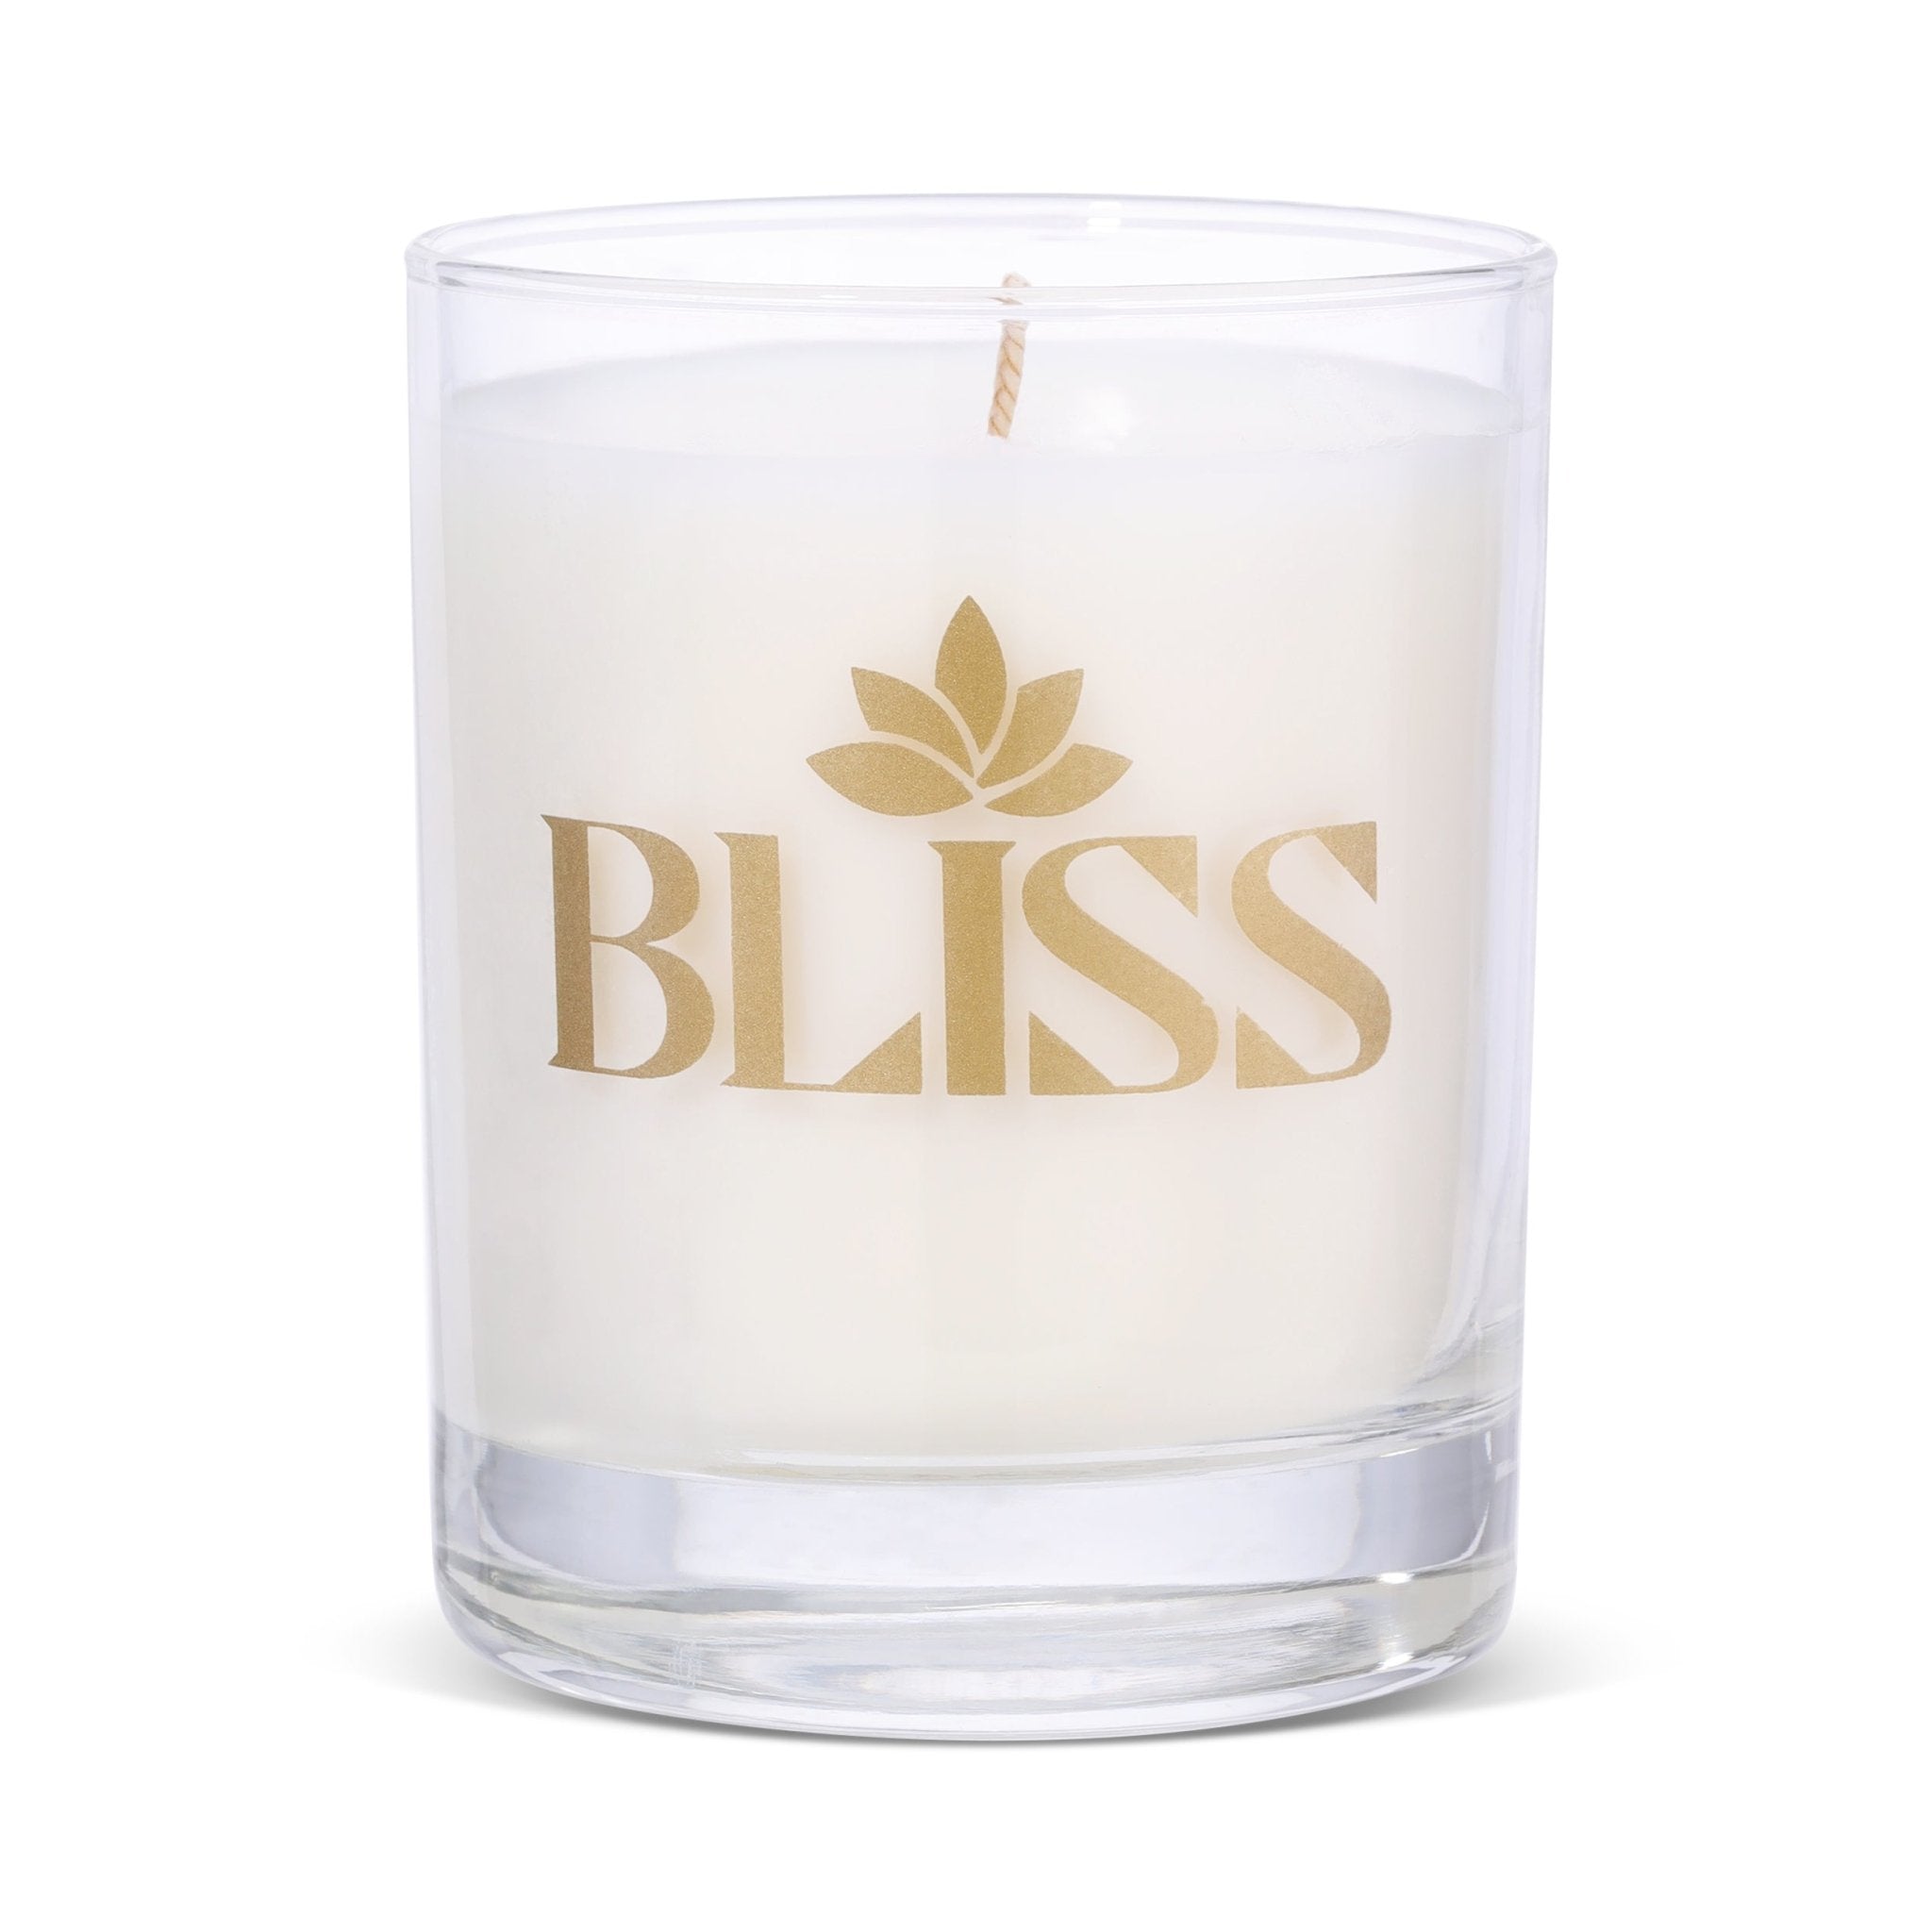 French Lavender Candle - Bliss